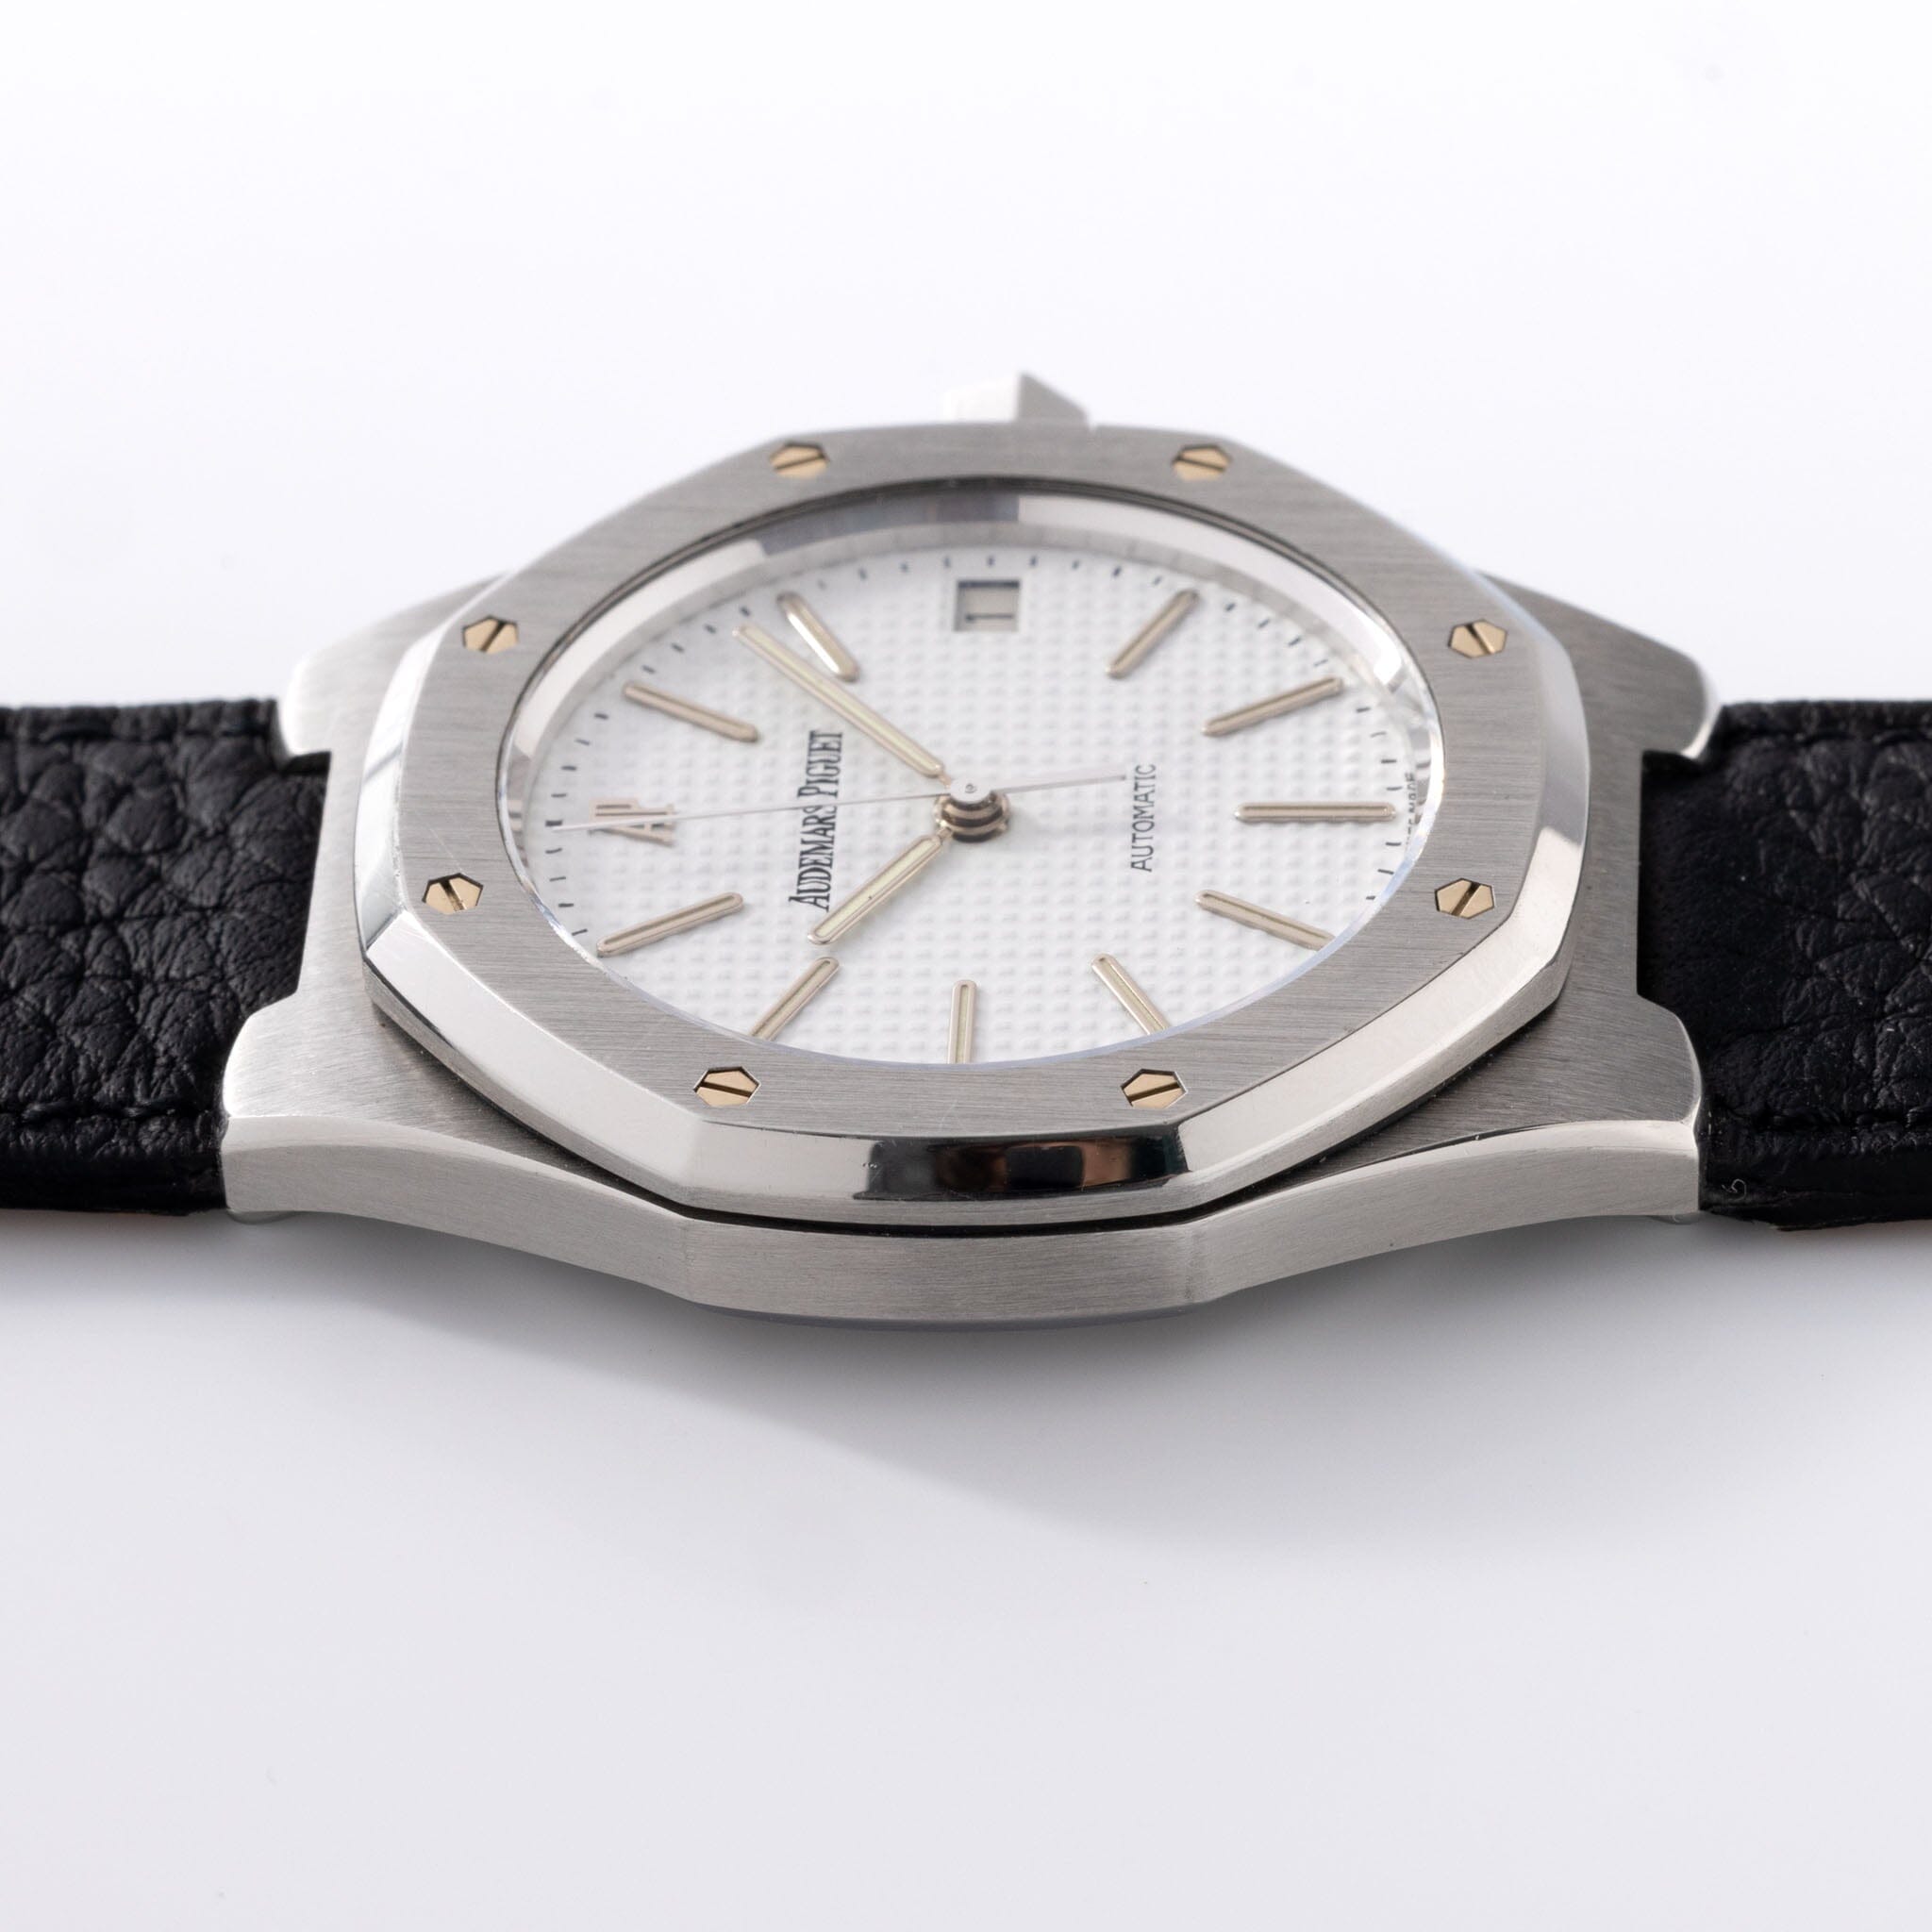 Audemars Piguet Royal Oak Steel 14800ST Box and Papers two dials